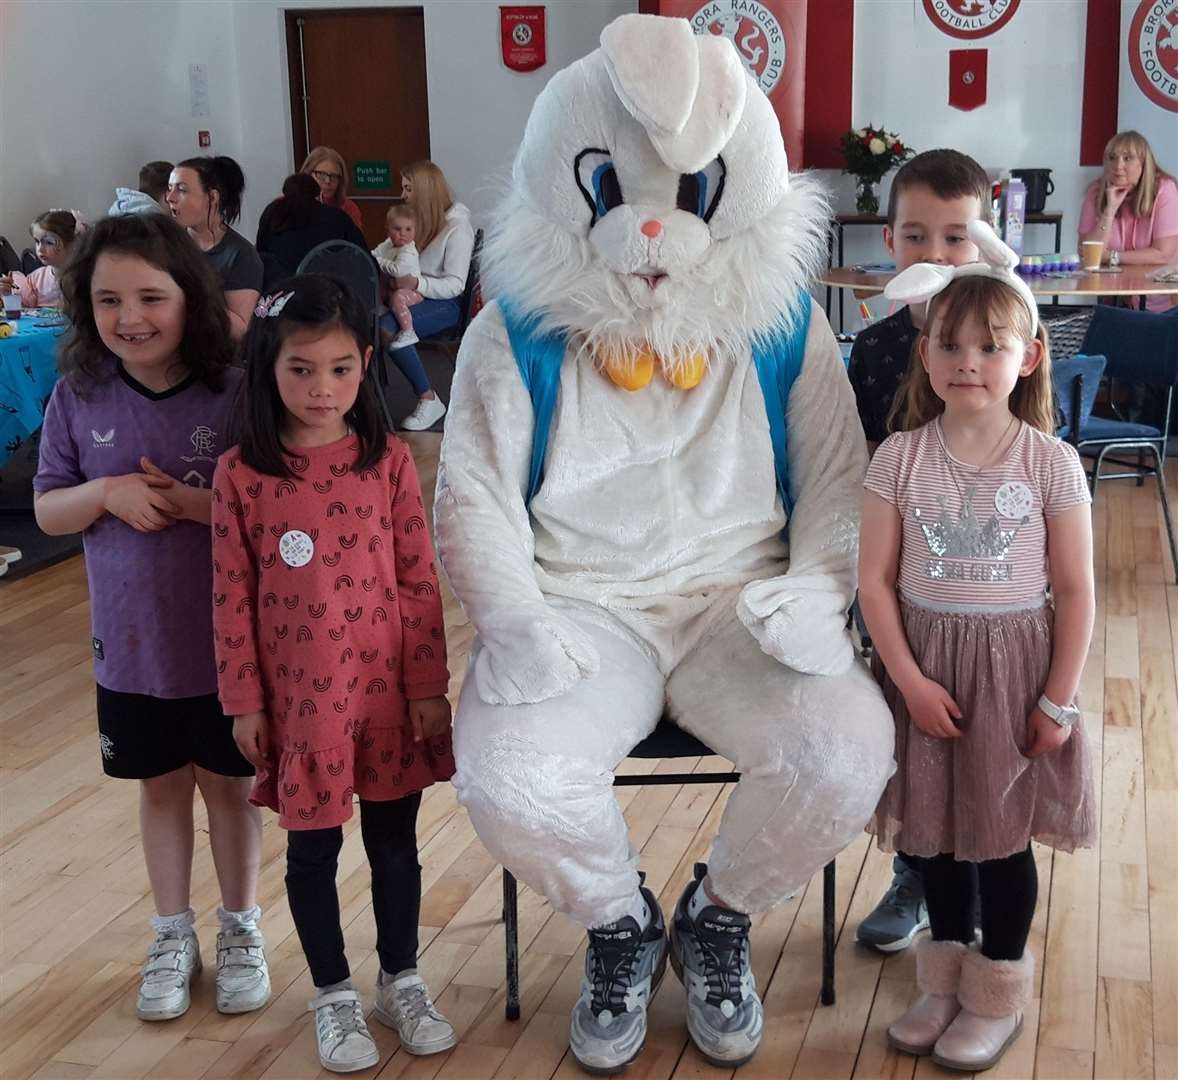 The star attraction at Brora's Easter Party, held in Dudgeon Park, was the Easter Bunny.